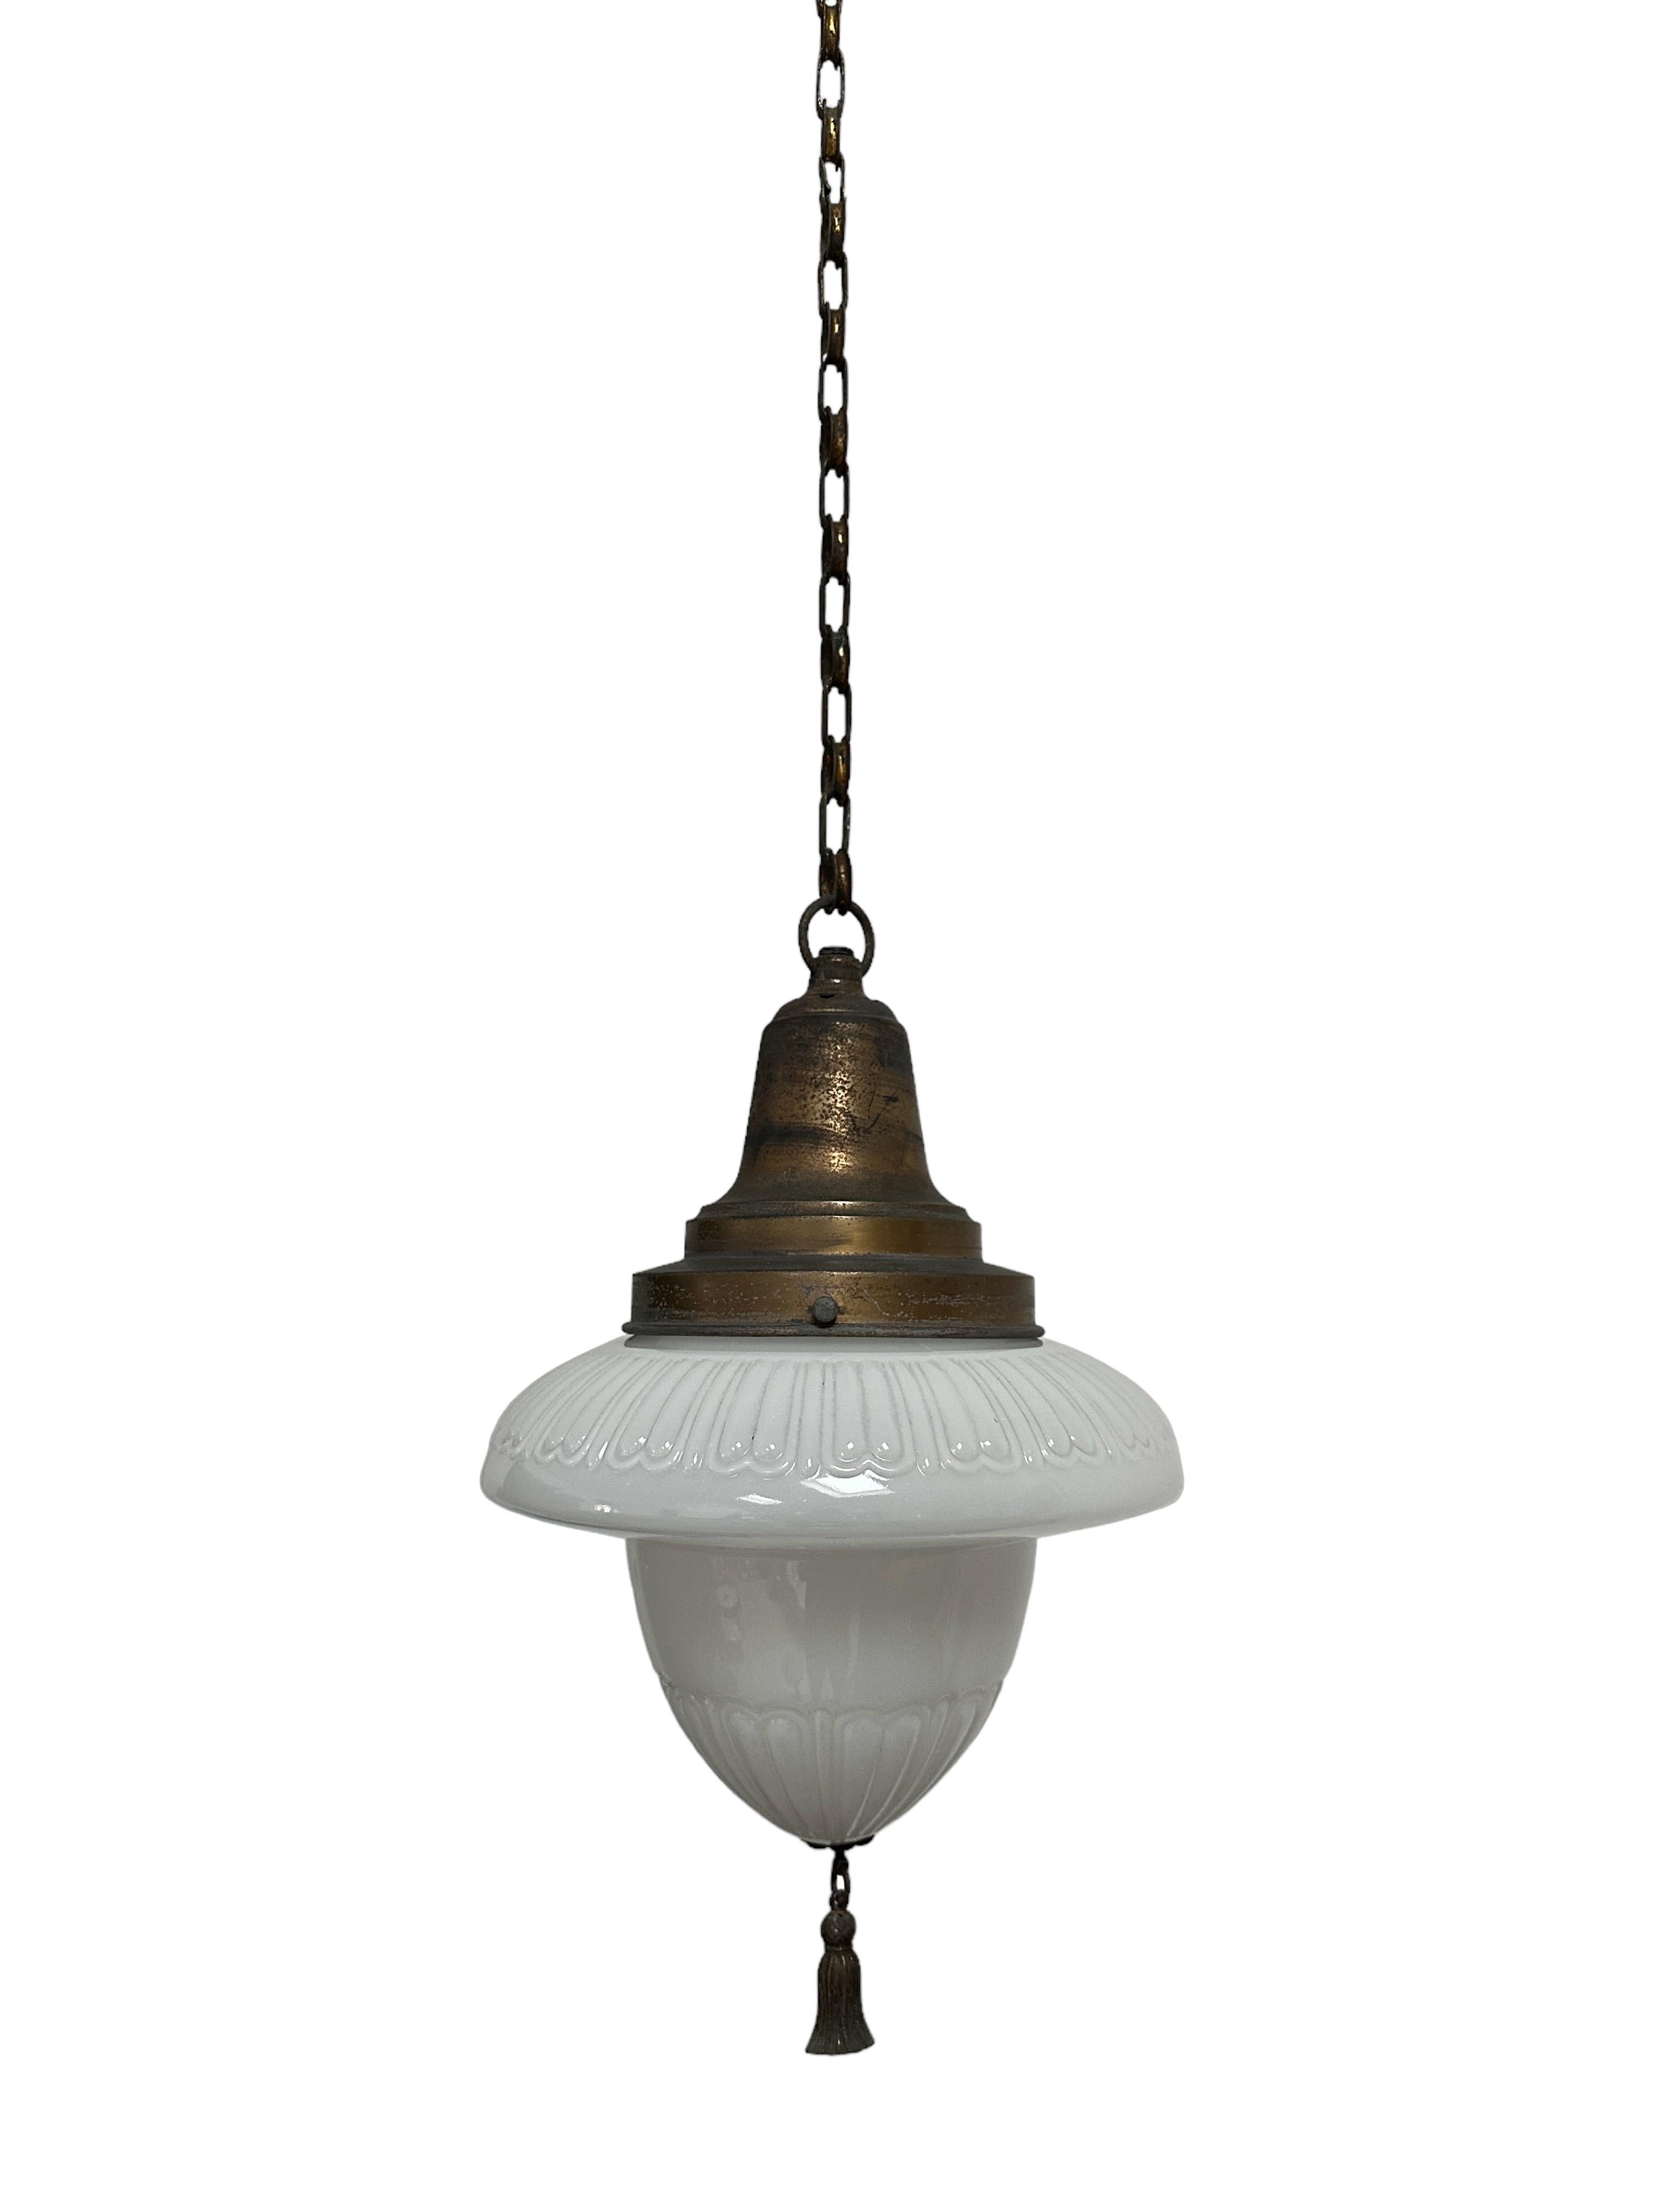 Antique Vintage Edwardian Acorn Church Opaline Milk Glass Ceiling Pendant Light In Good Condition For Sale In Sale, GB